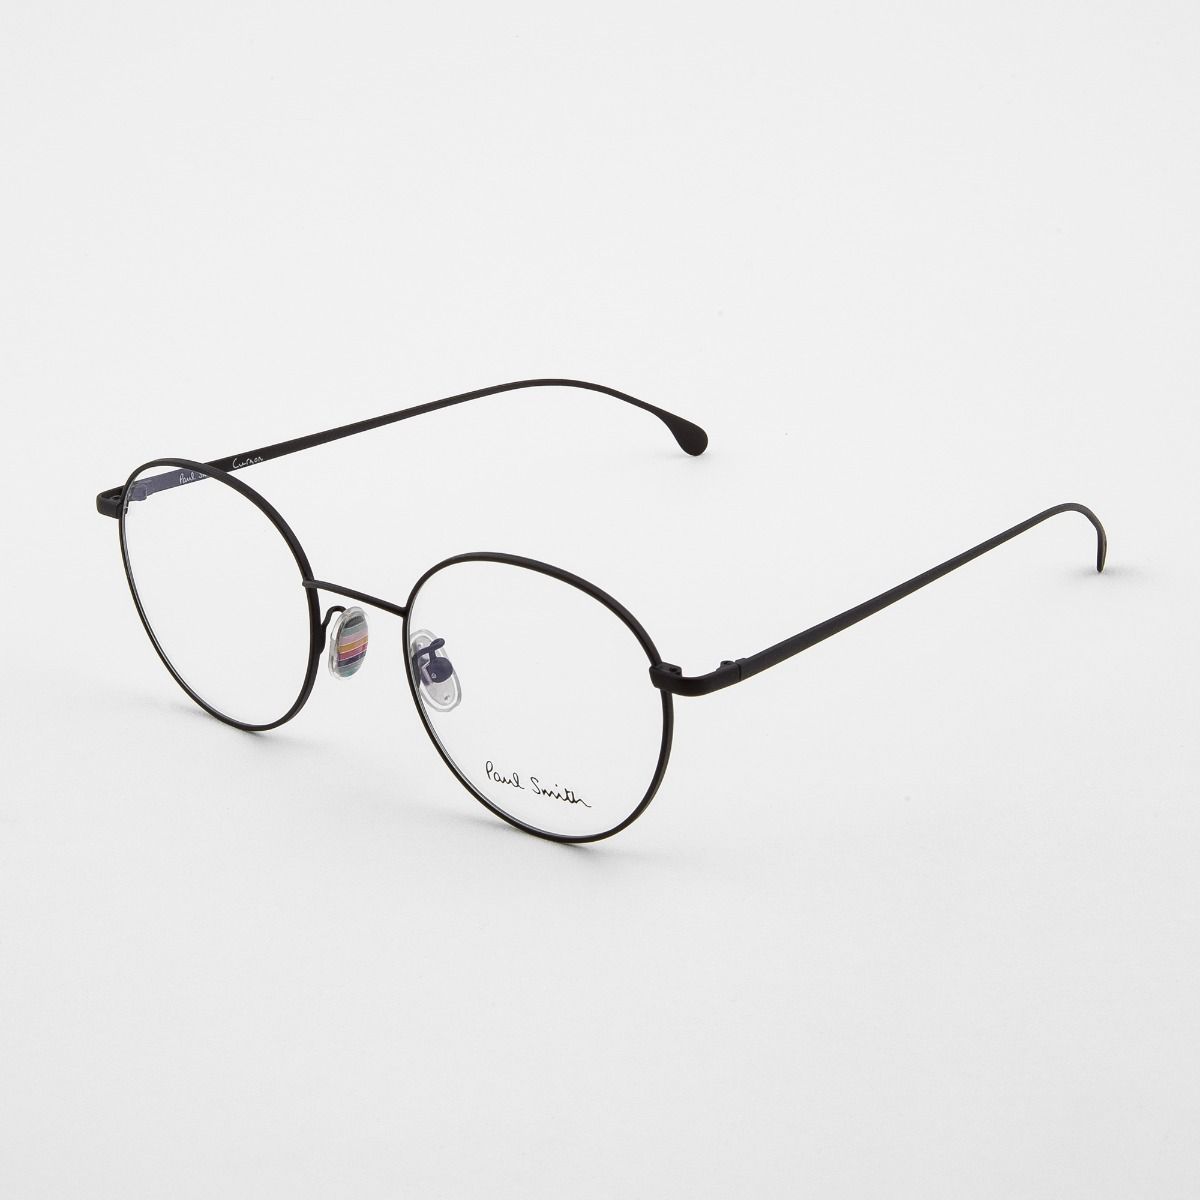 Paul Smith Curzon Optical Round Glasses (Large)